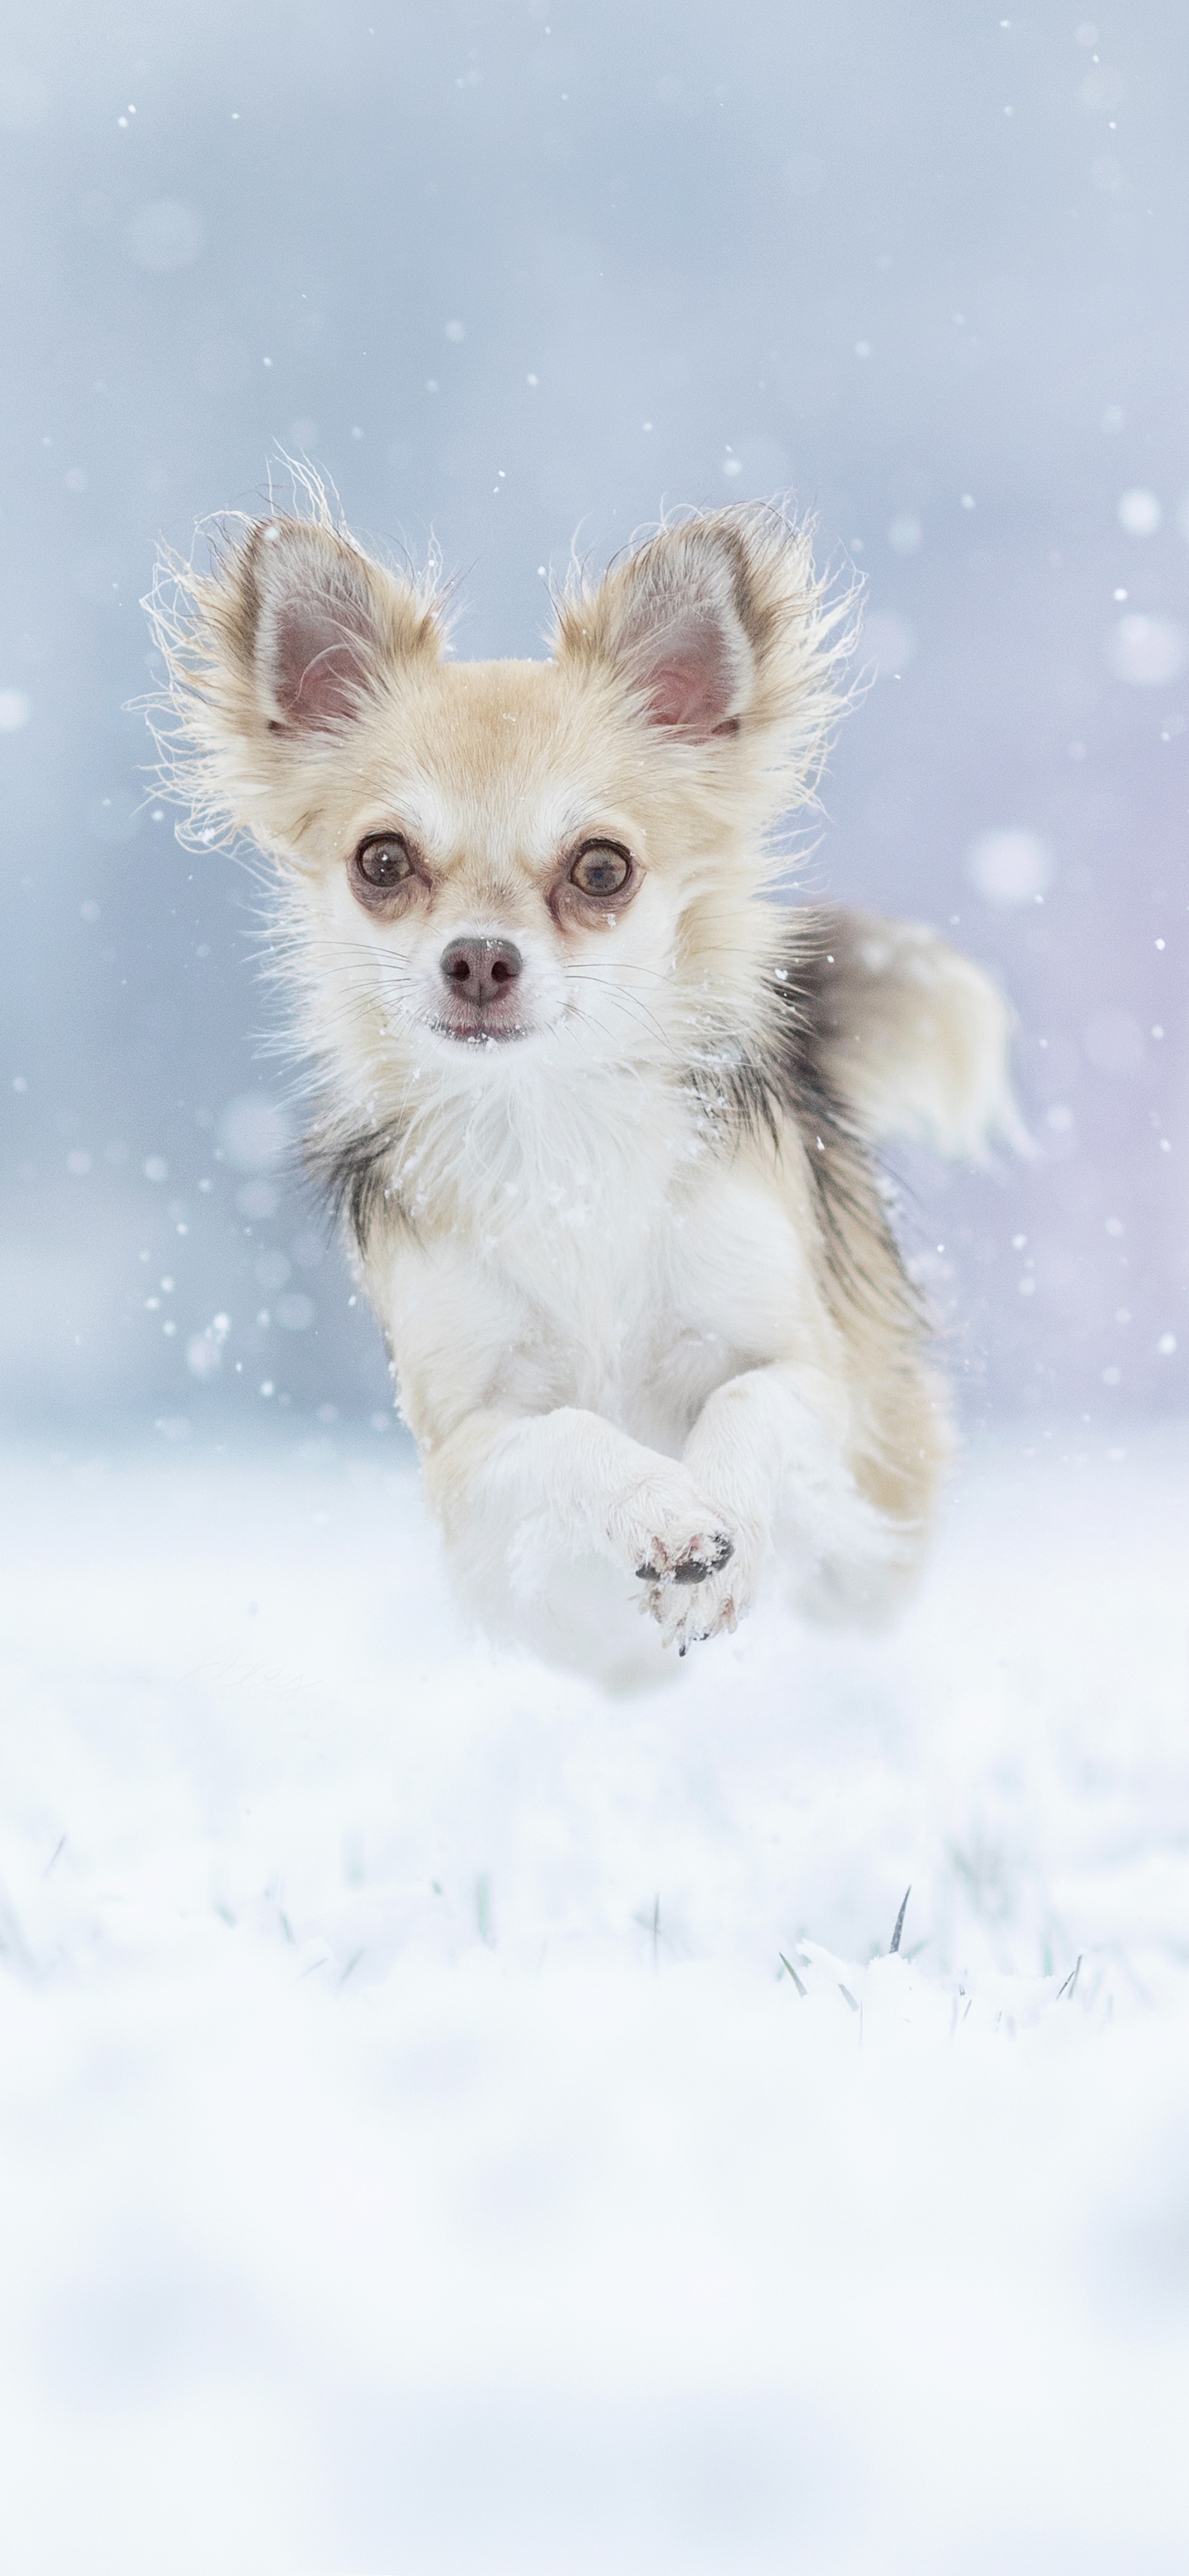 Chihuahua Running in Snowstorm